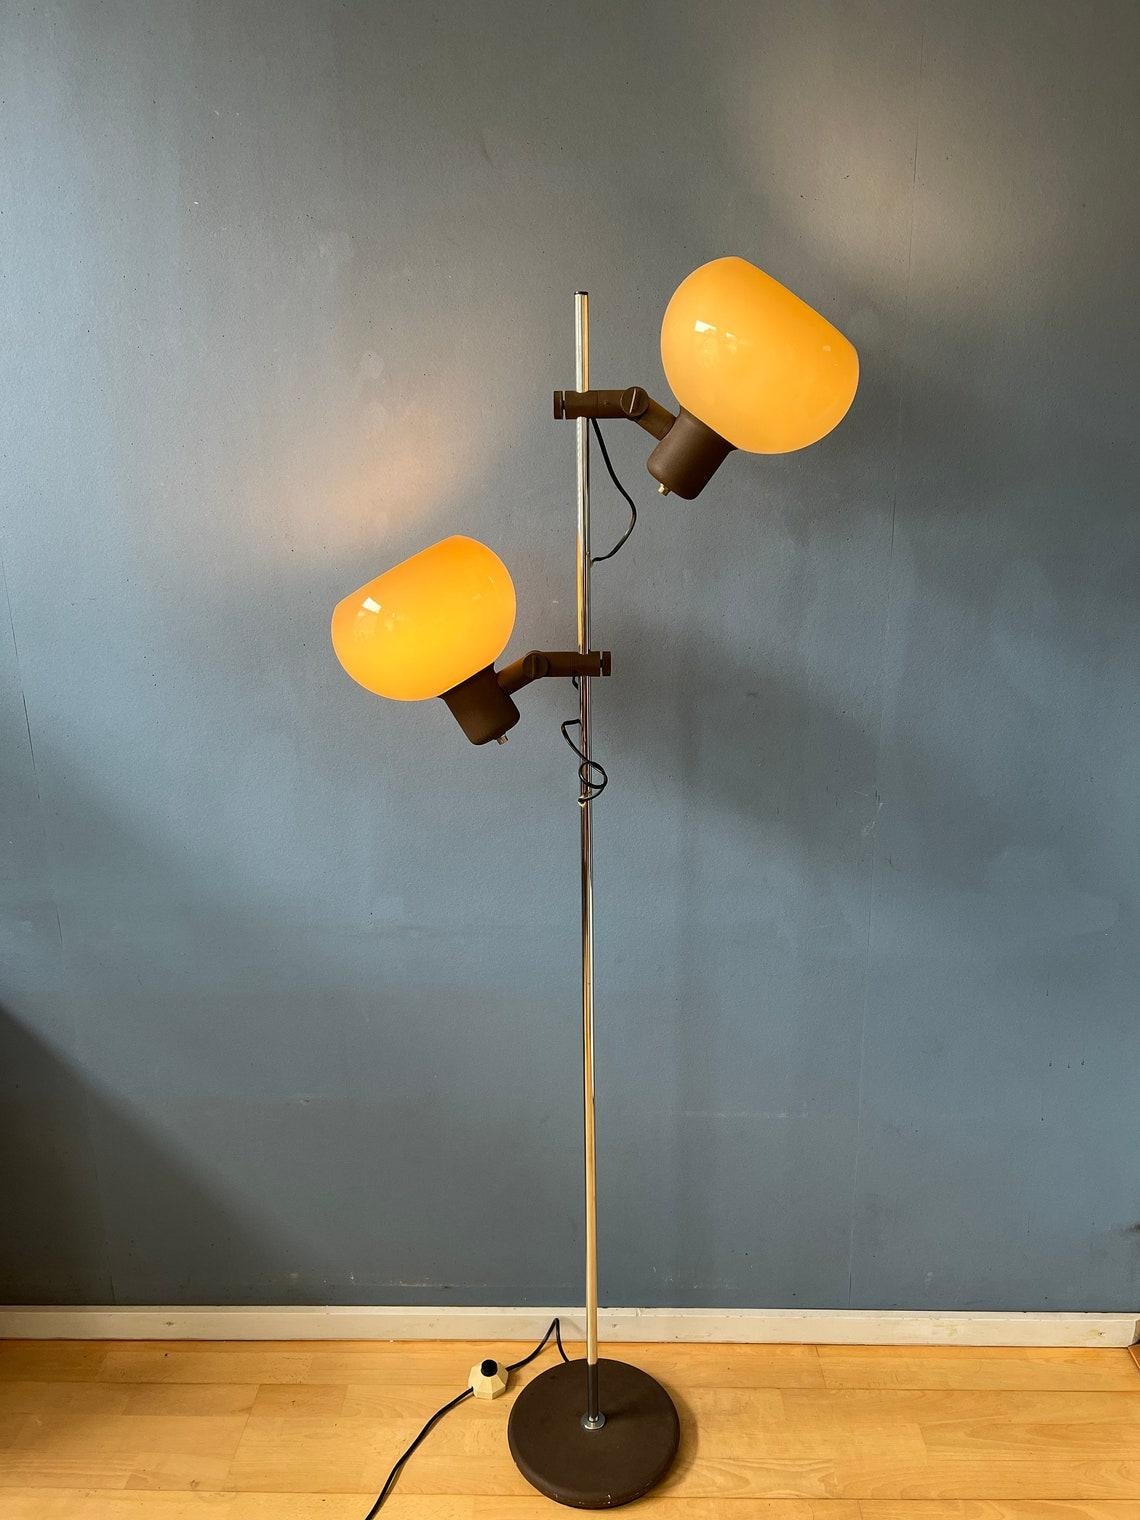 A beautiful mushroom floorlamp by Herda. The mushroom spots can be turned in any direction and move up and down the base. The floorswitch allows you to switch on the lights simultaneously or separately. The lamp requires two E27